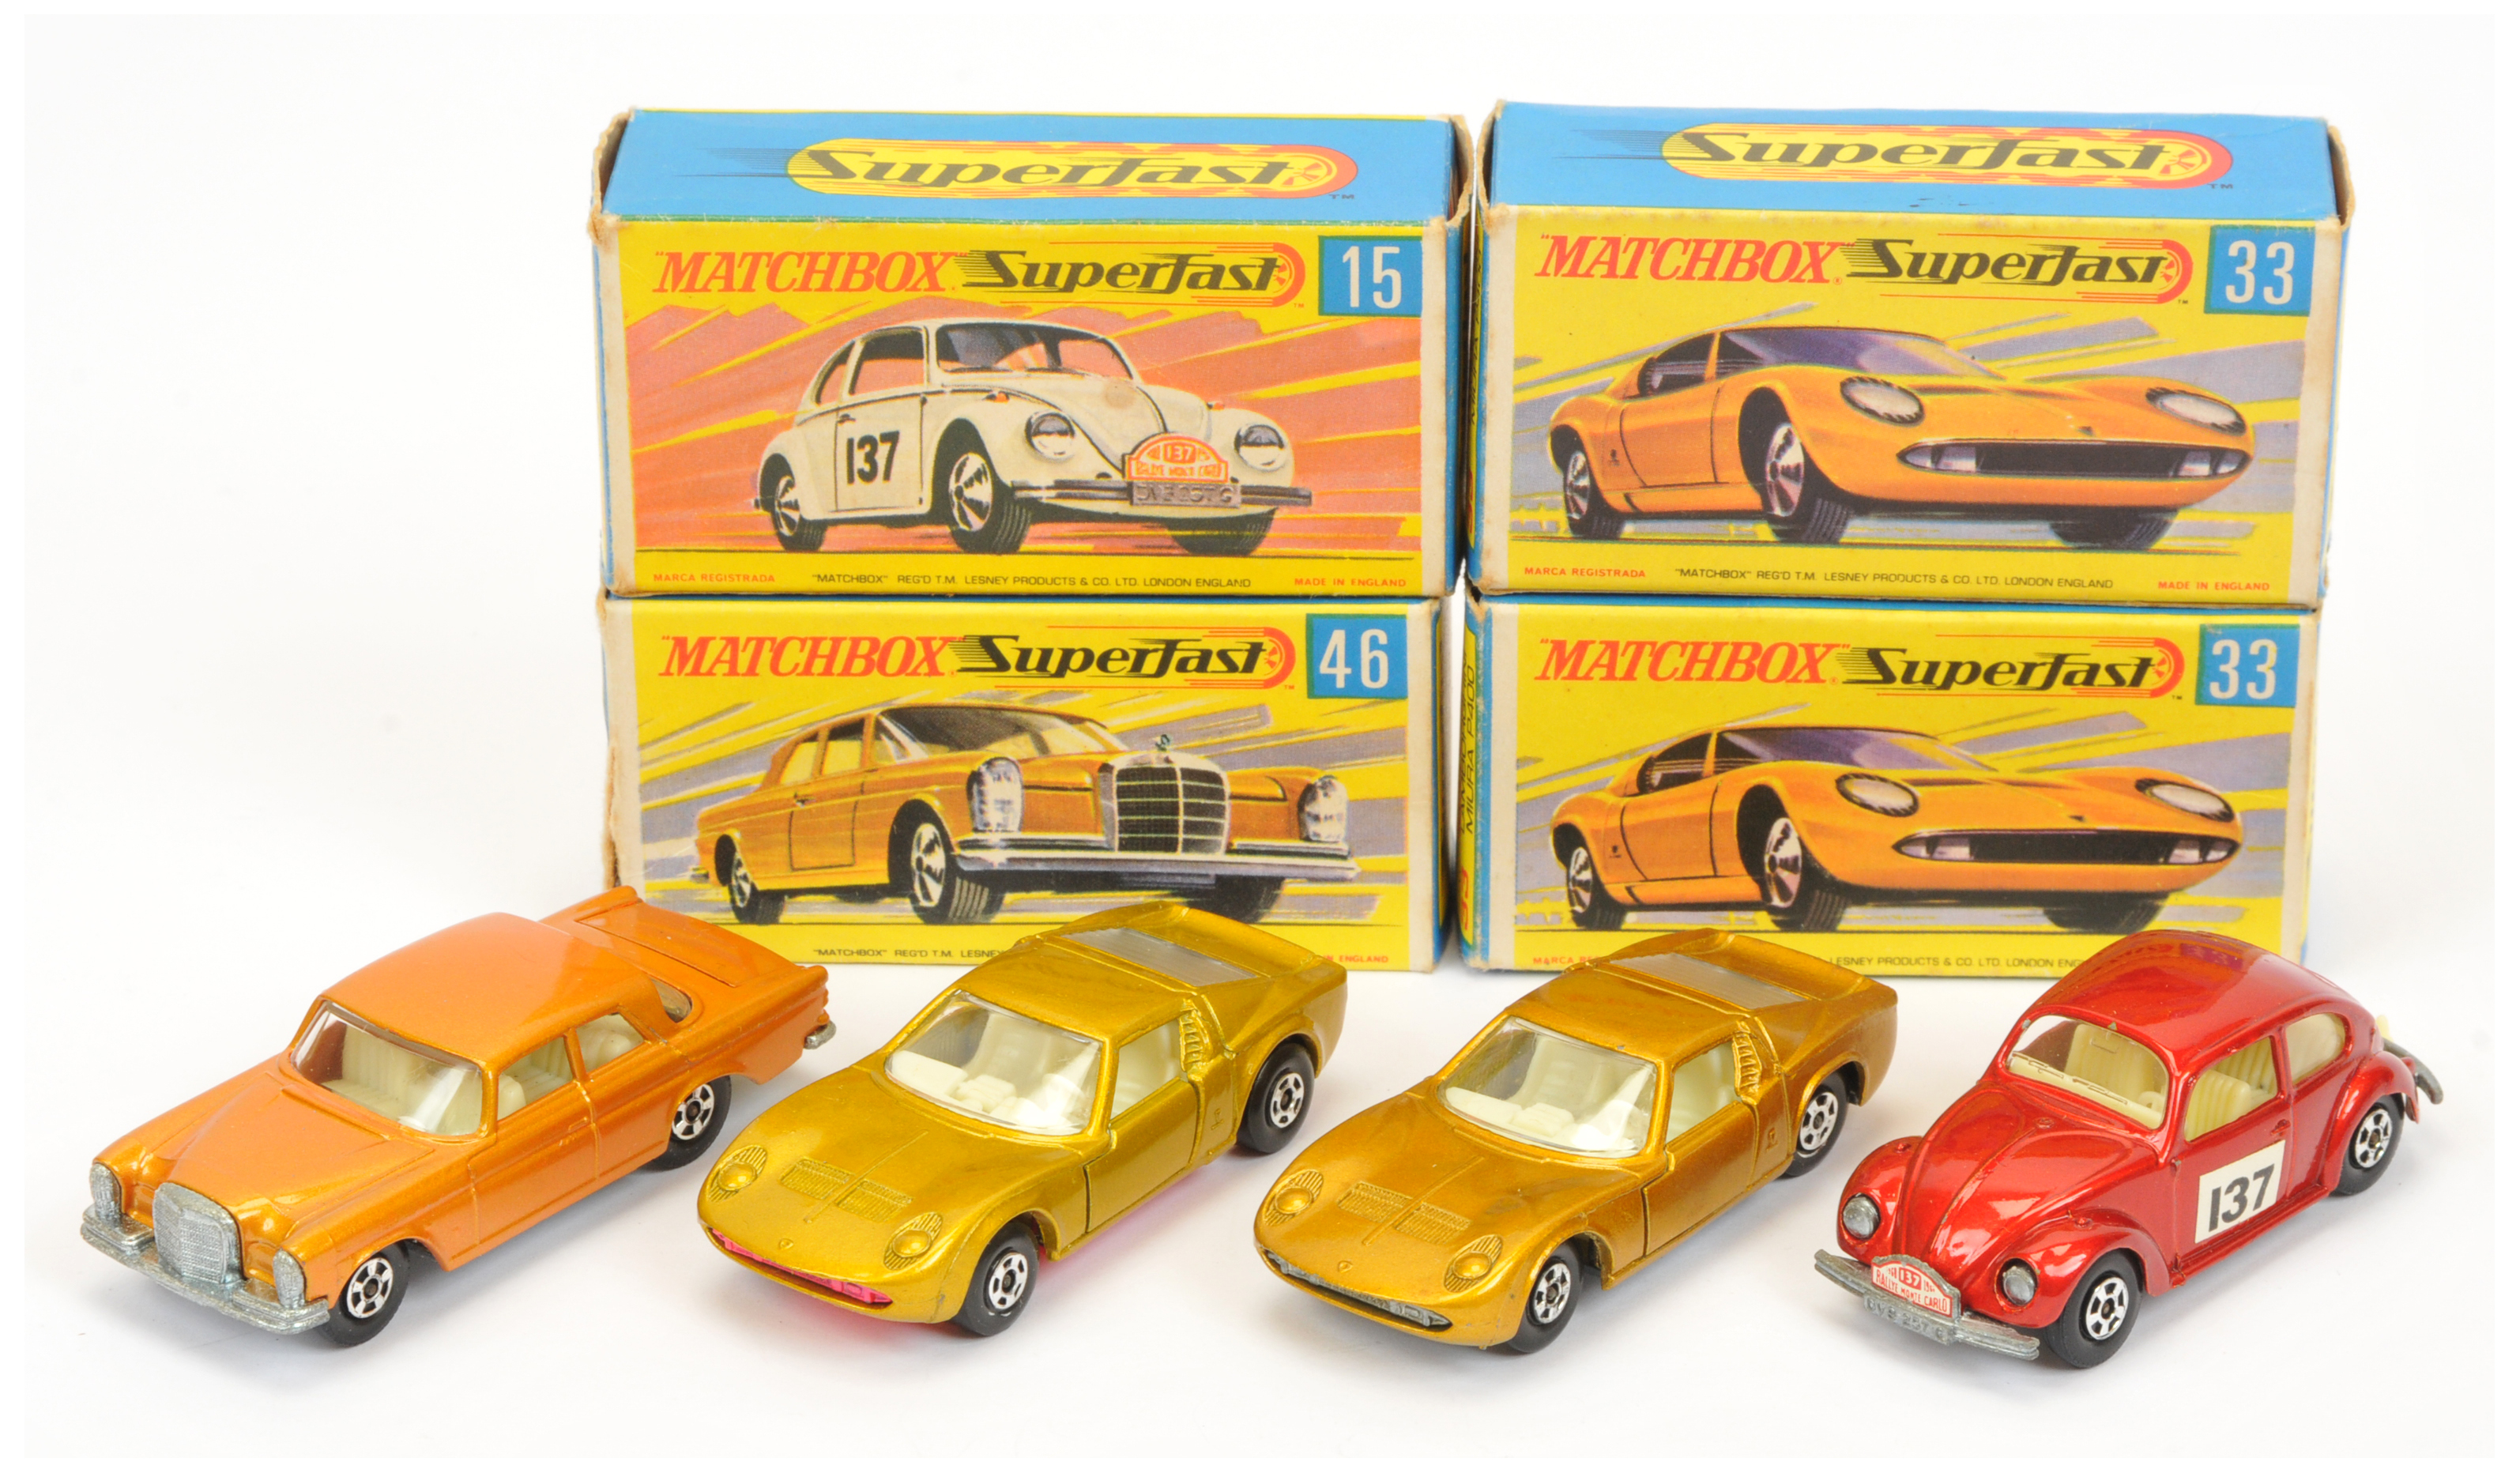 Matchbox Superfast  Group Of 4 - (1) 15a Volkswagen "Rallye Monte Carlo" - Metallic red with raci...